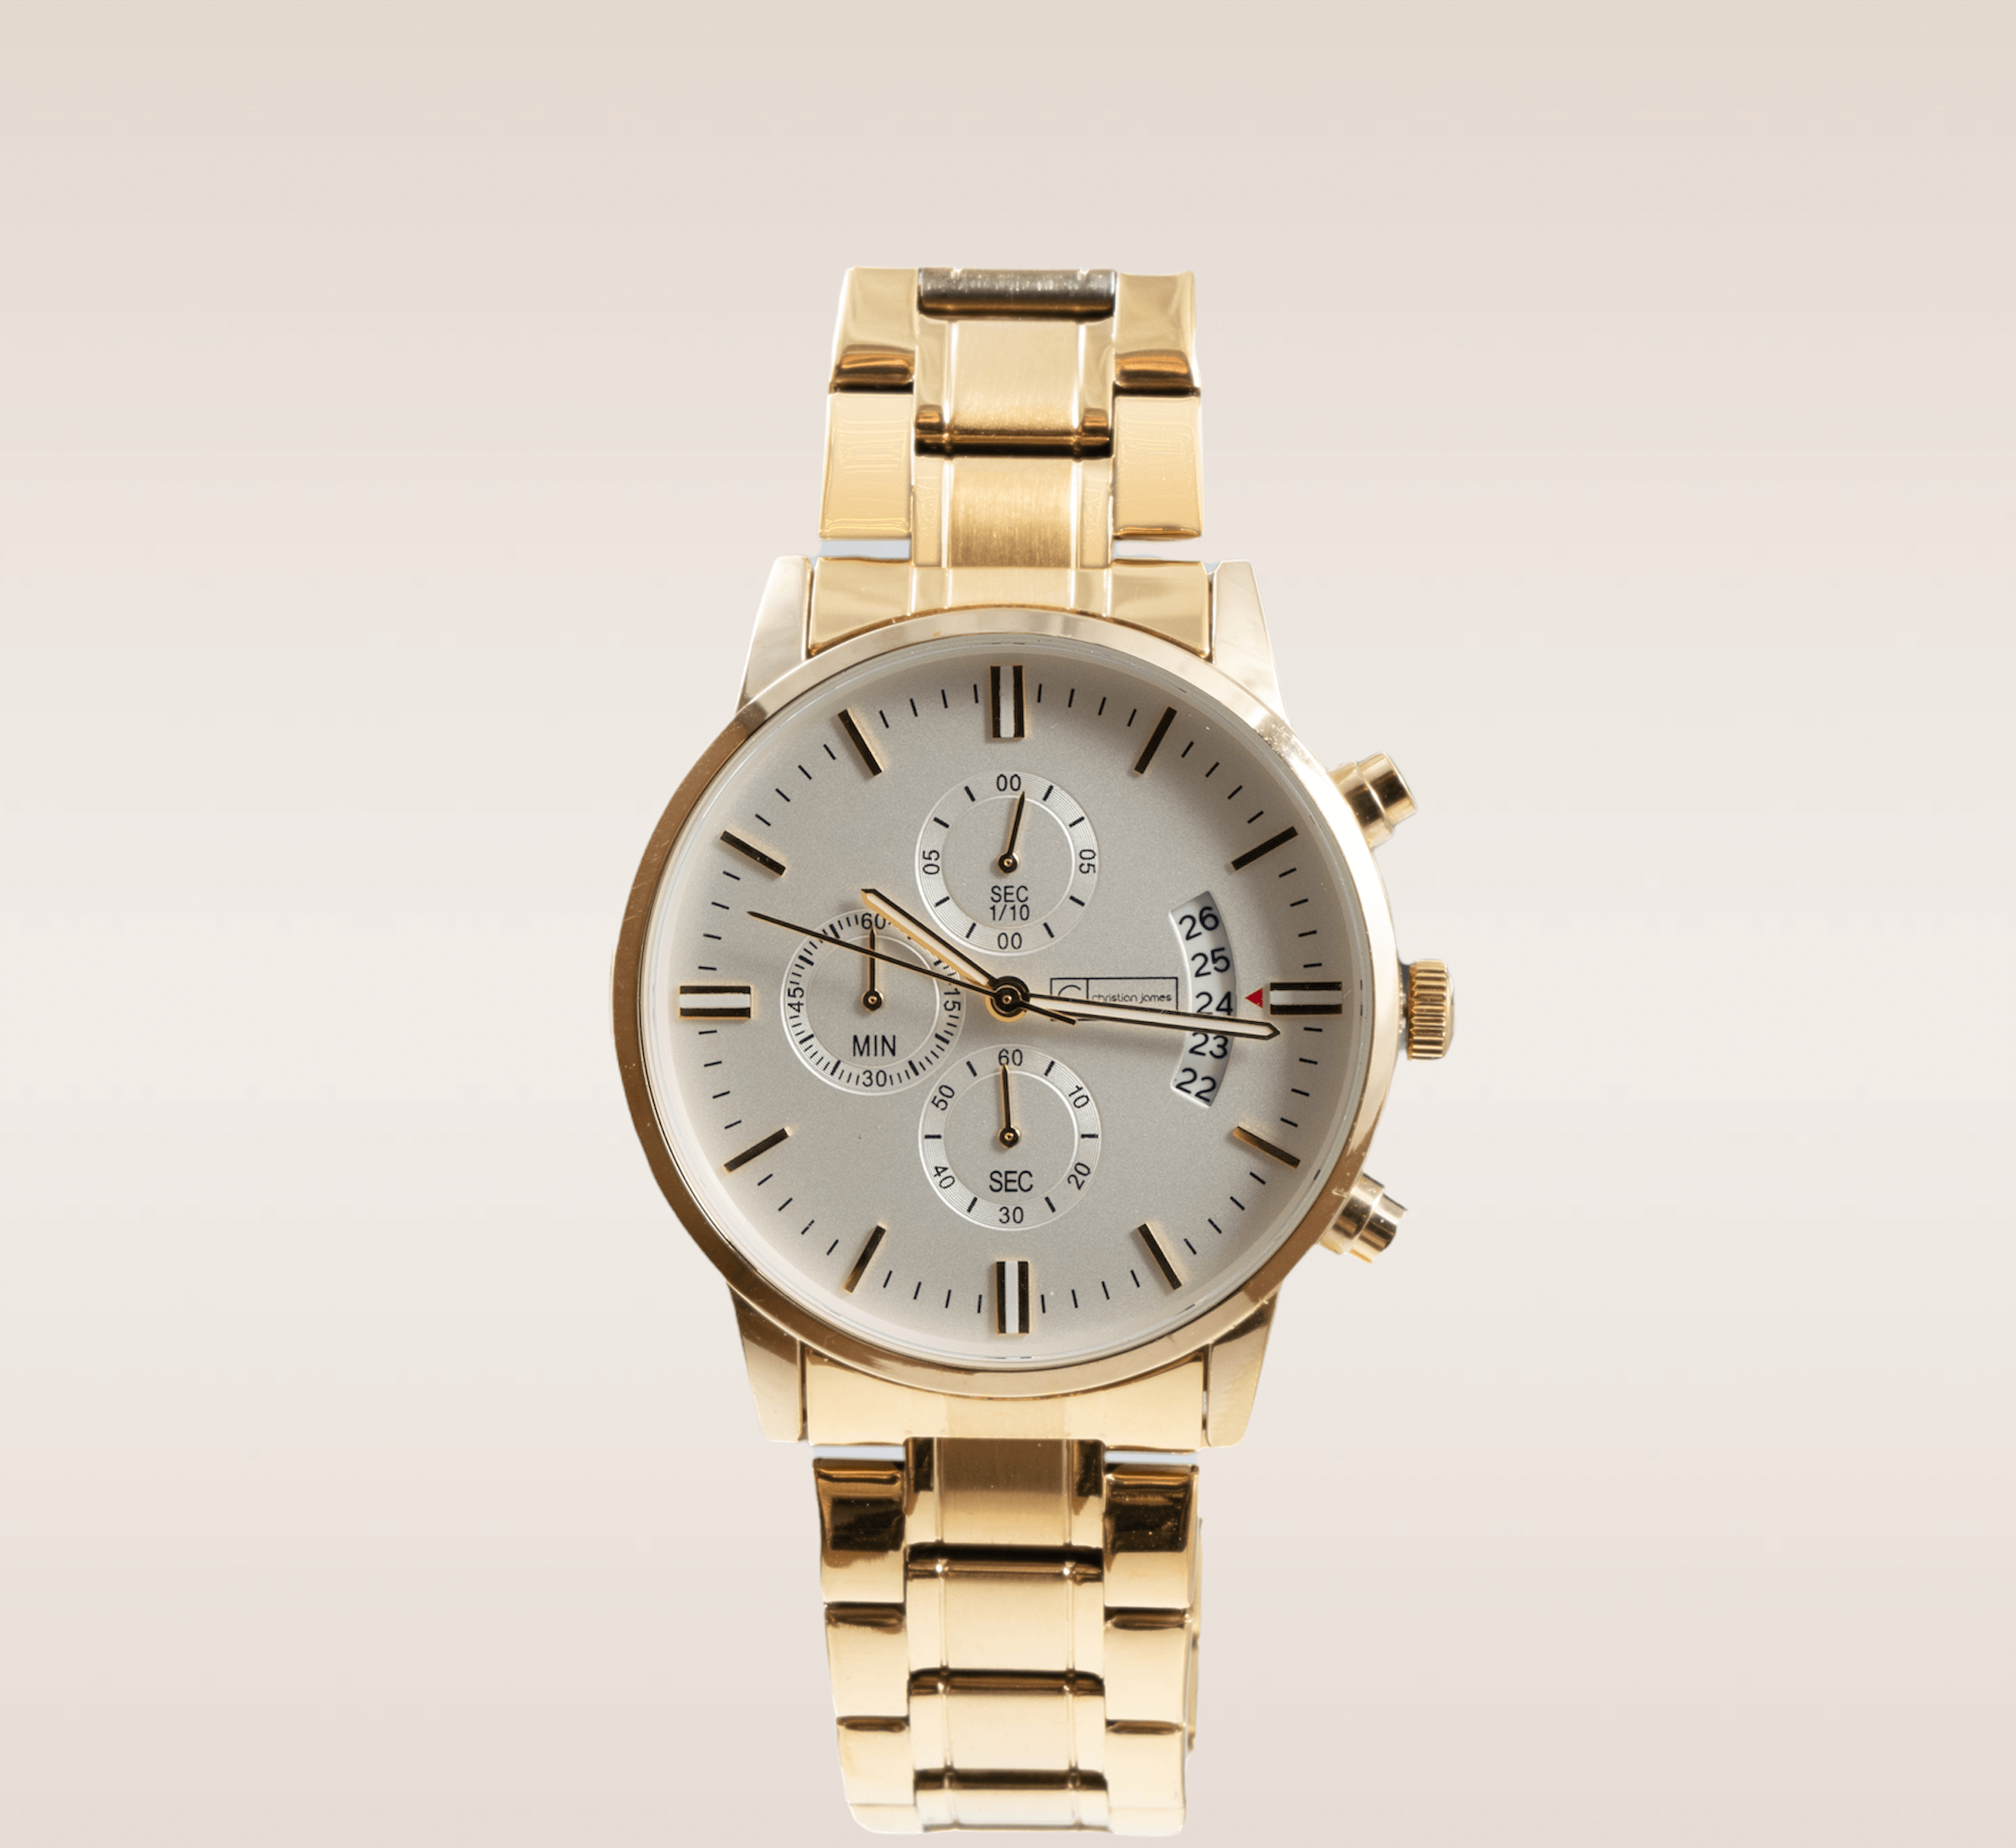 In this up-close shot, we are presented with the captivating Heaven on Earth Timepiece, a symbol of elegance and precision. The watch features a stunning gold link bracelet that wraps around the wrist, exuding a sense of luxury and sophistication. The cream watch face provides a striking contrast against the gold, creating a bold and timeless aesthetic. 